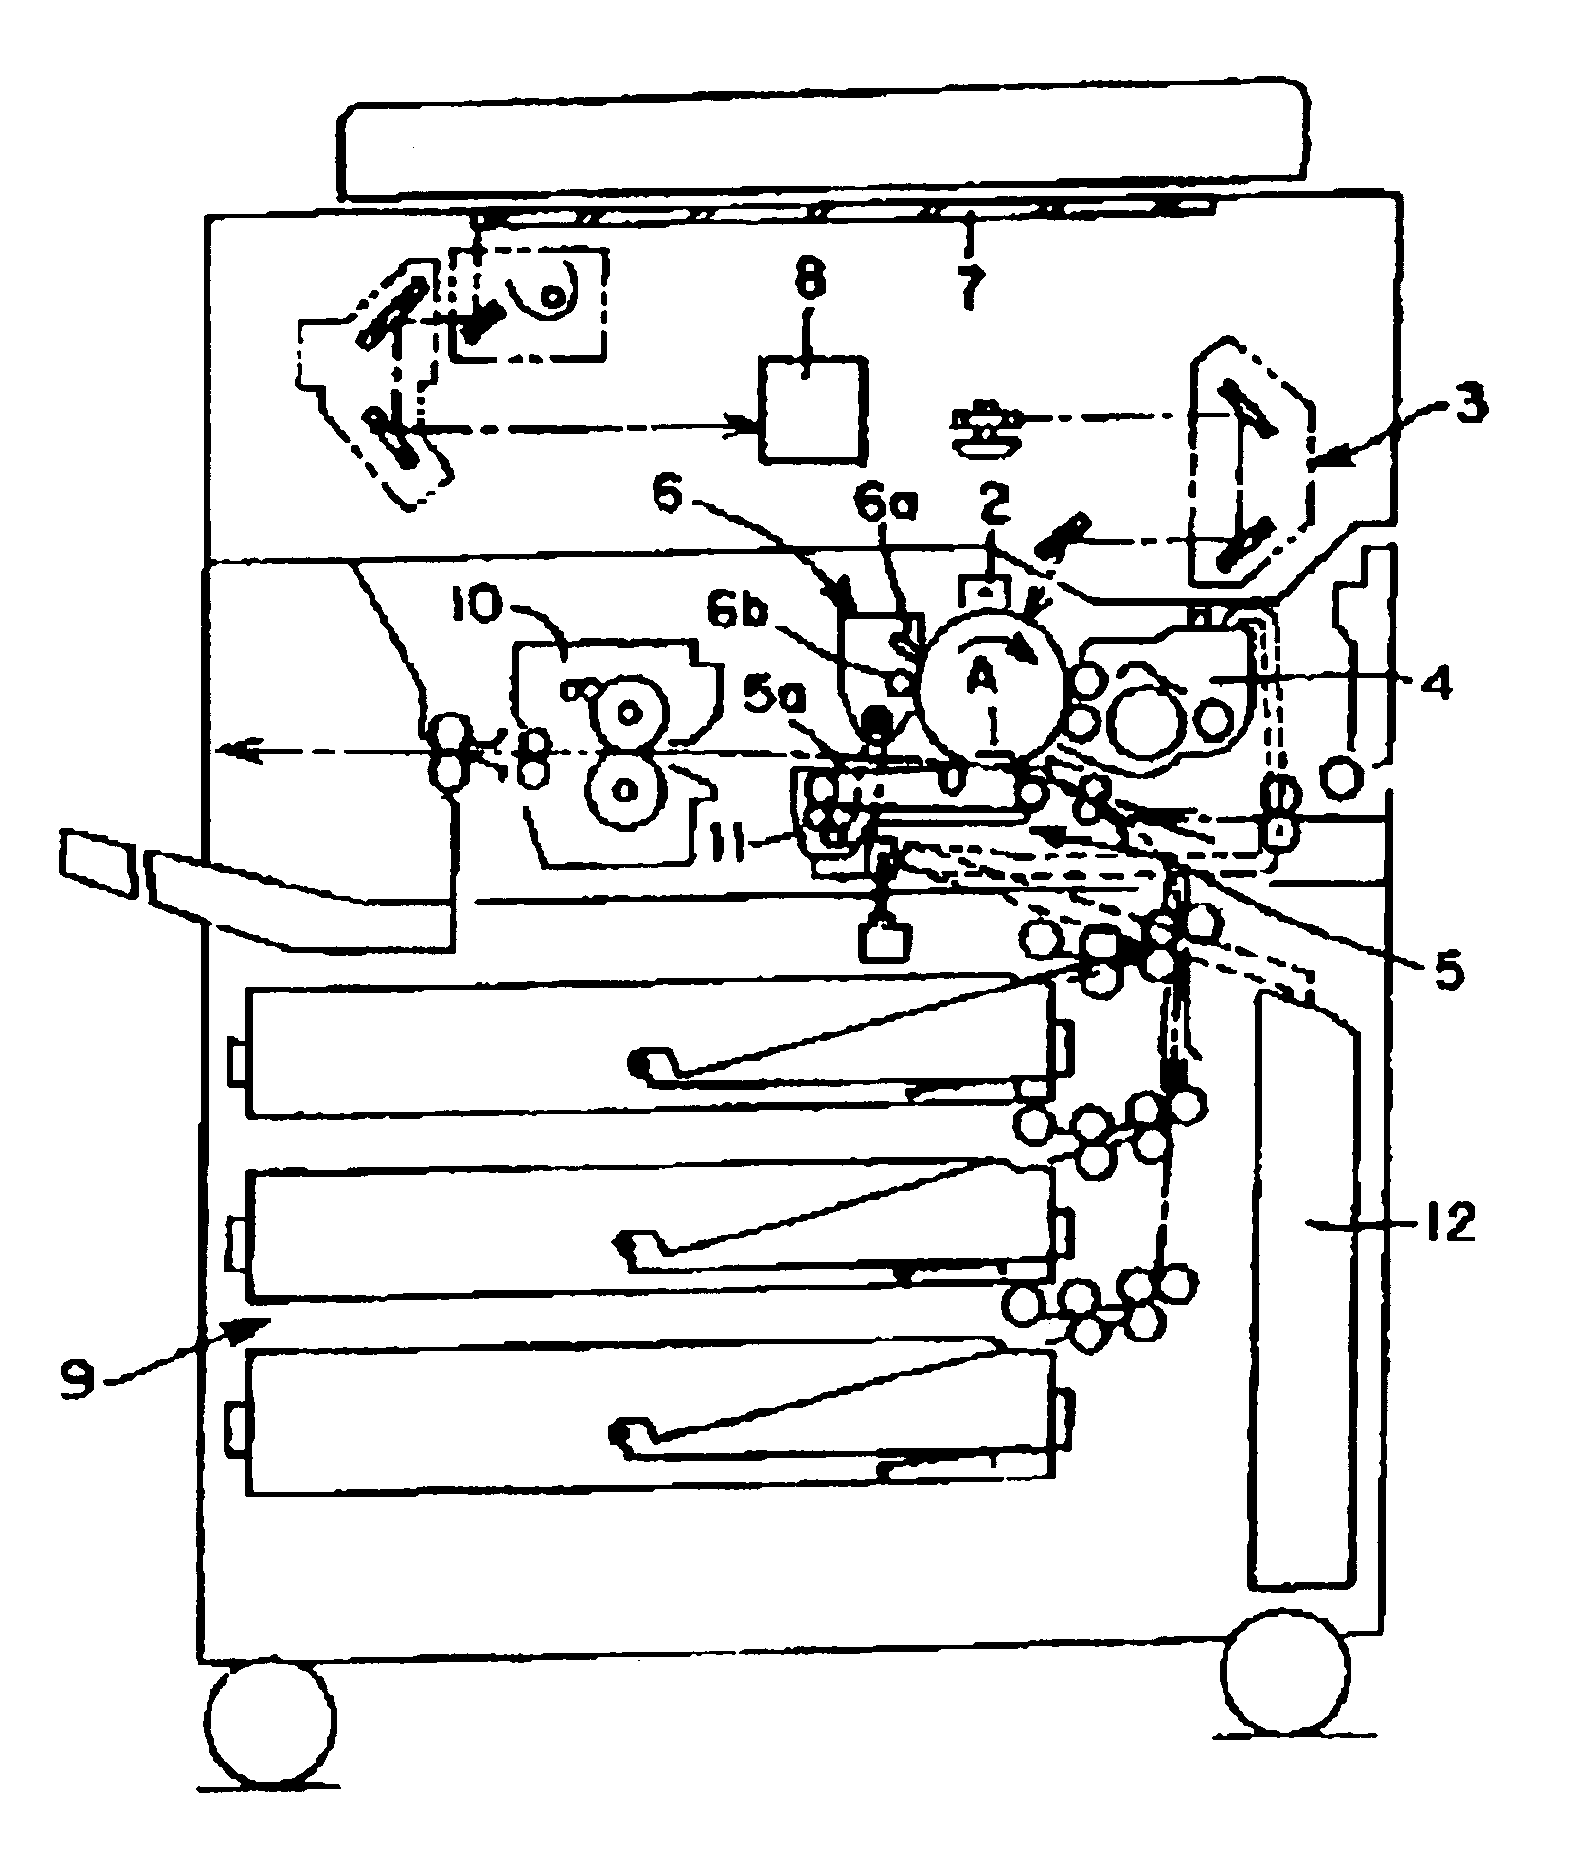 Toner and image forming apparatus using the toner